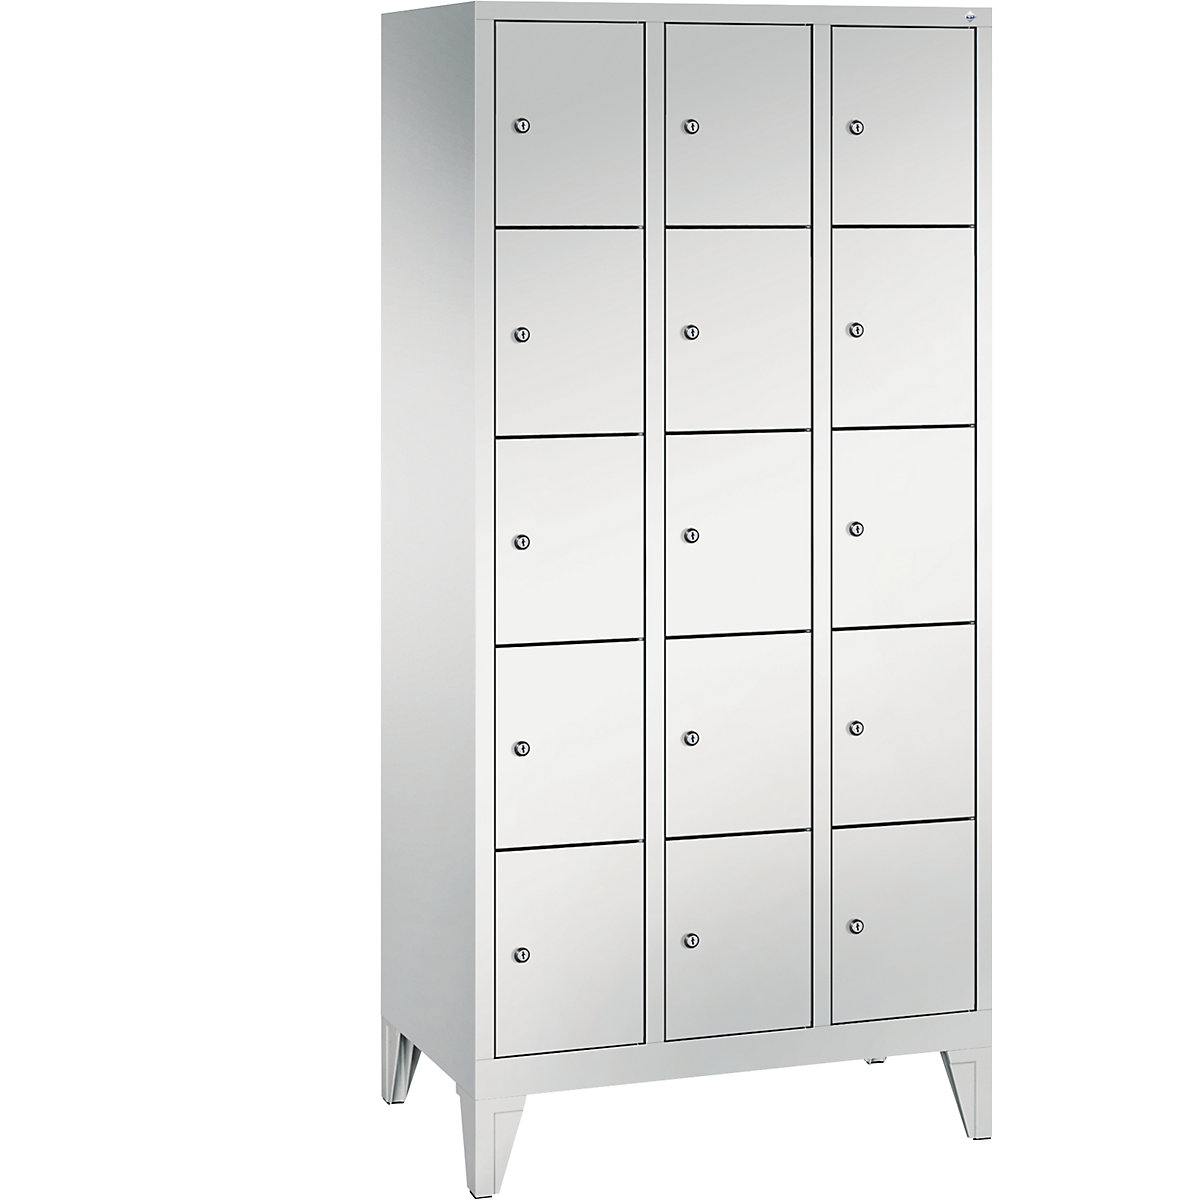 CLASSIC locker unit with feet – C+P, 3 compartments, 5 shelf compartments each, compartment width 300 mm, light grey-12